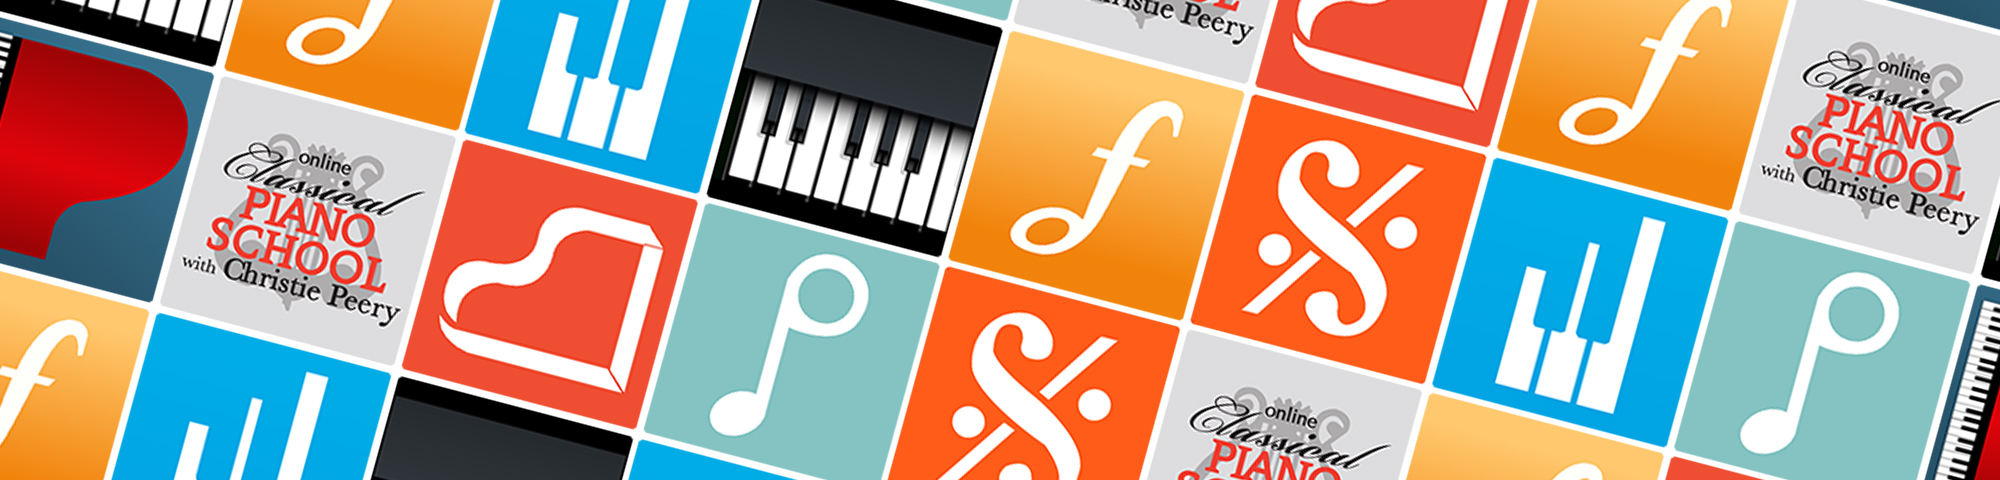 Best Online Piano Lessons 2019 Piano Apps And Software To Learn - best online piano lessons 2019 piano apps and software to learn piano online top ten reviews